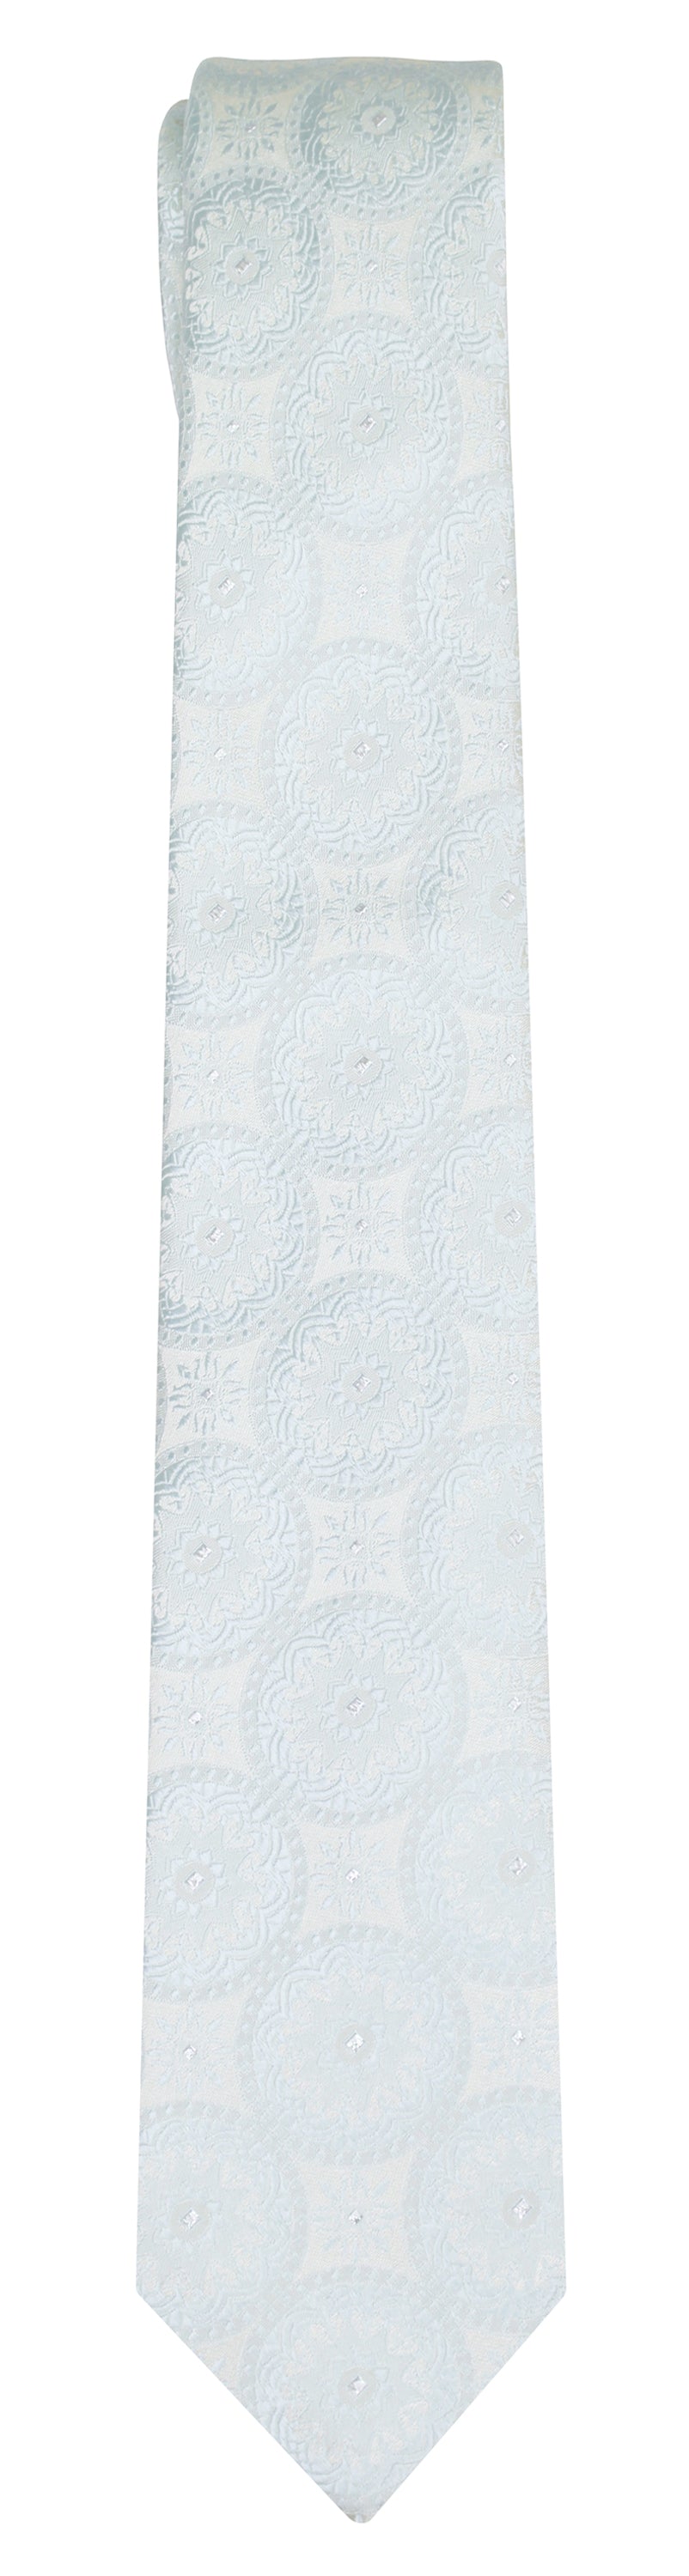 Mimi Fong Coin Tie in Light Blue